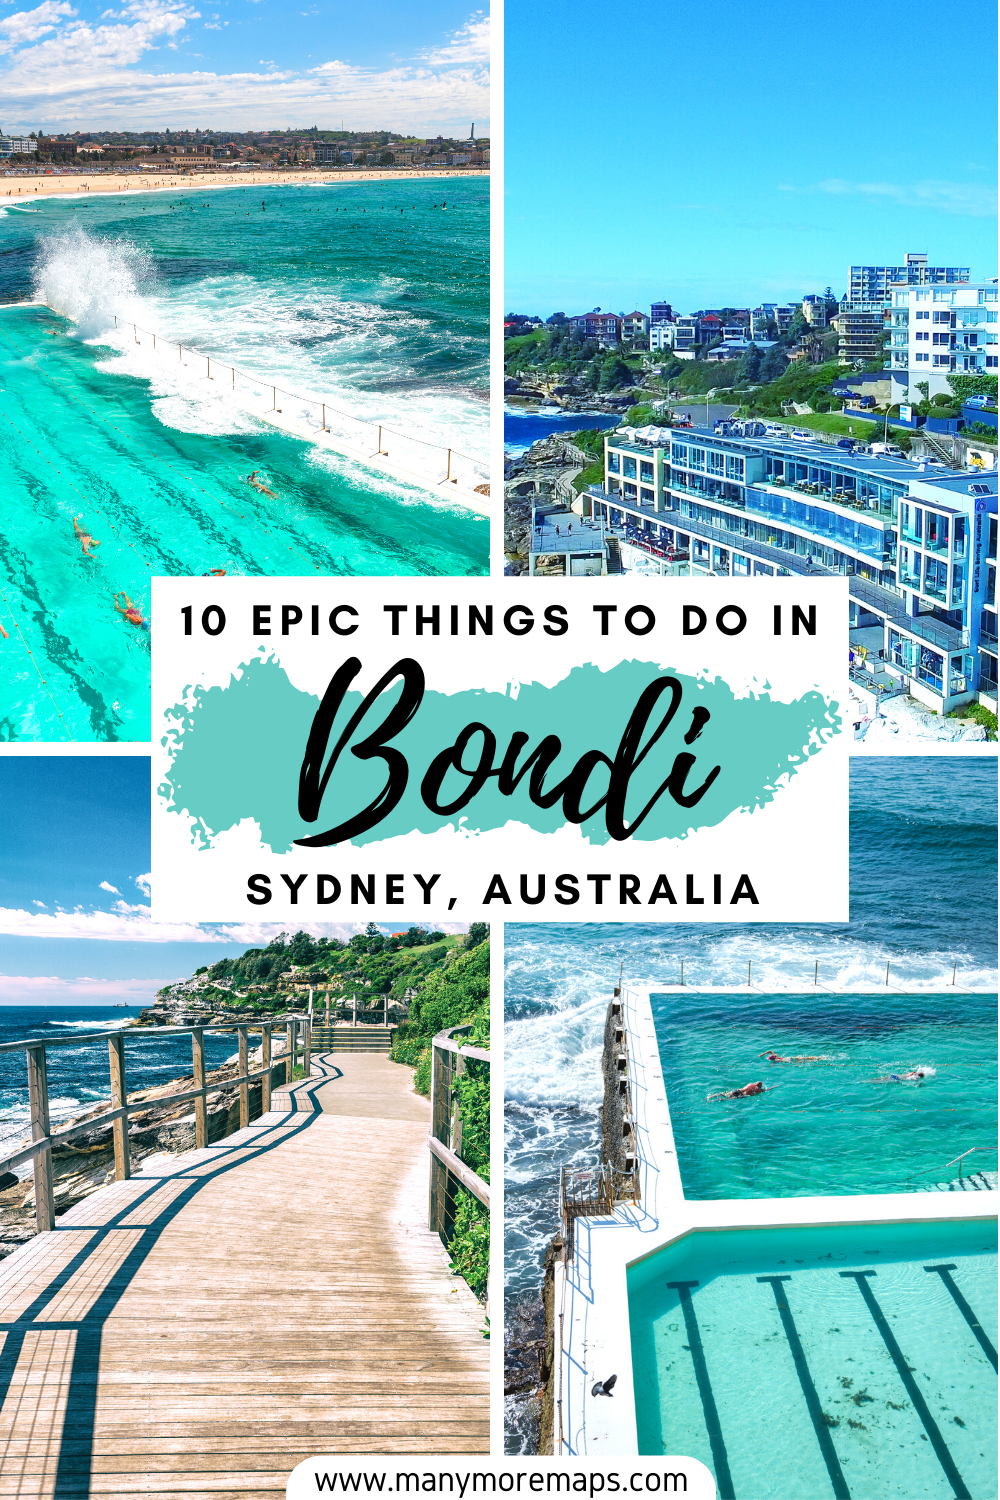 Travelling to Sydney Australia and want to visit Bondi Beach? Well, there are actually a lot more things to do in Bondi than just the beach! Here are the very best activities to enjoy in this awesome neighbourhood of Sydney.